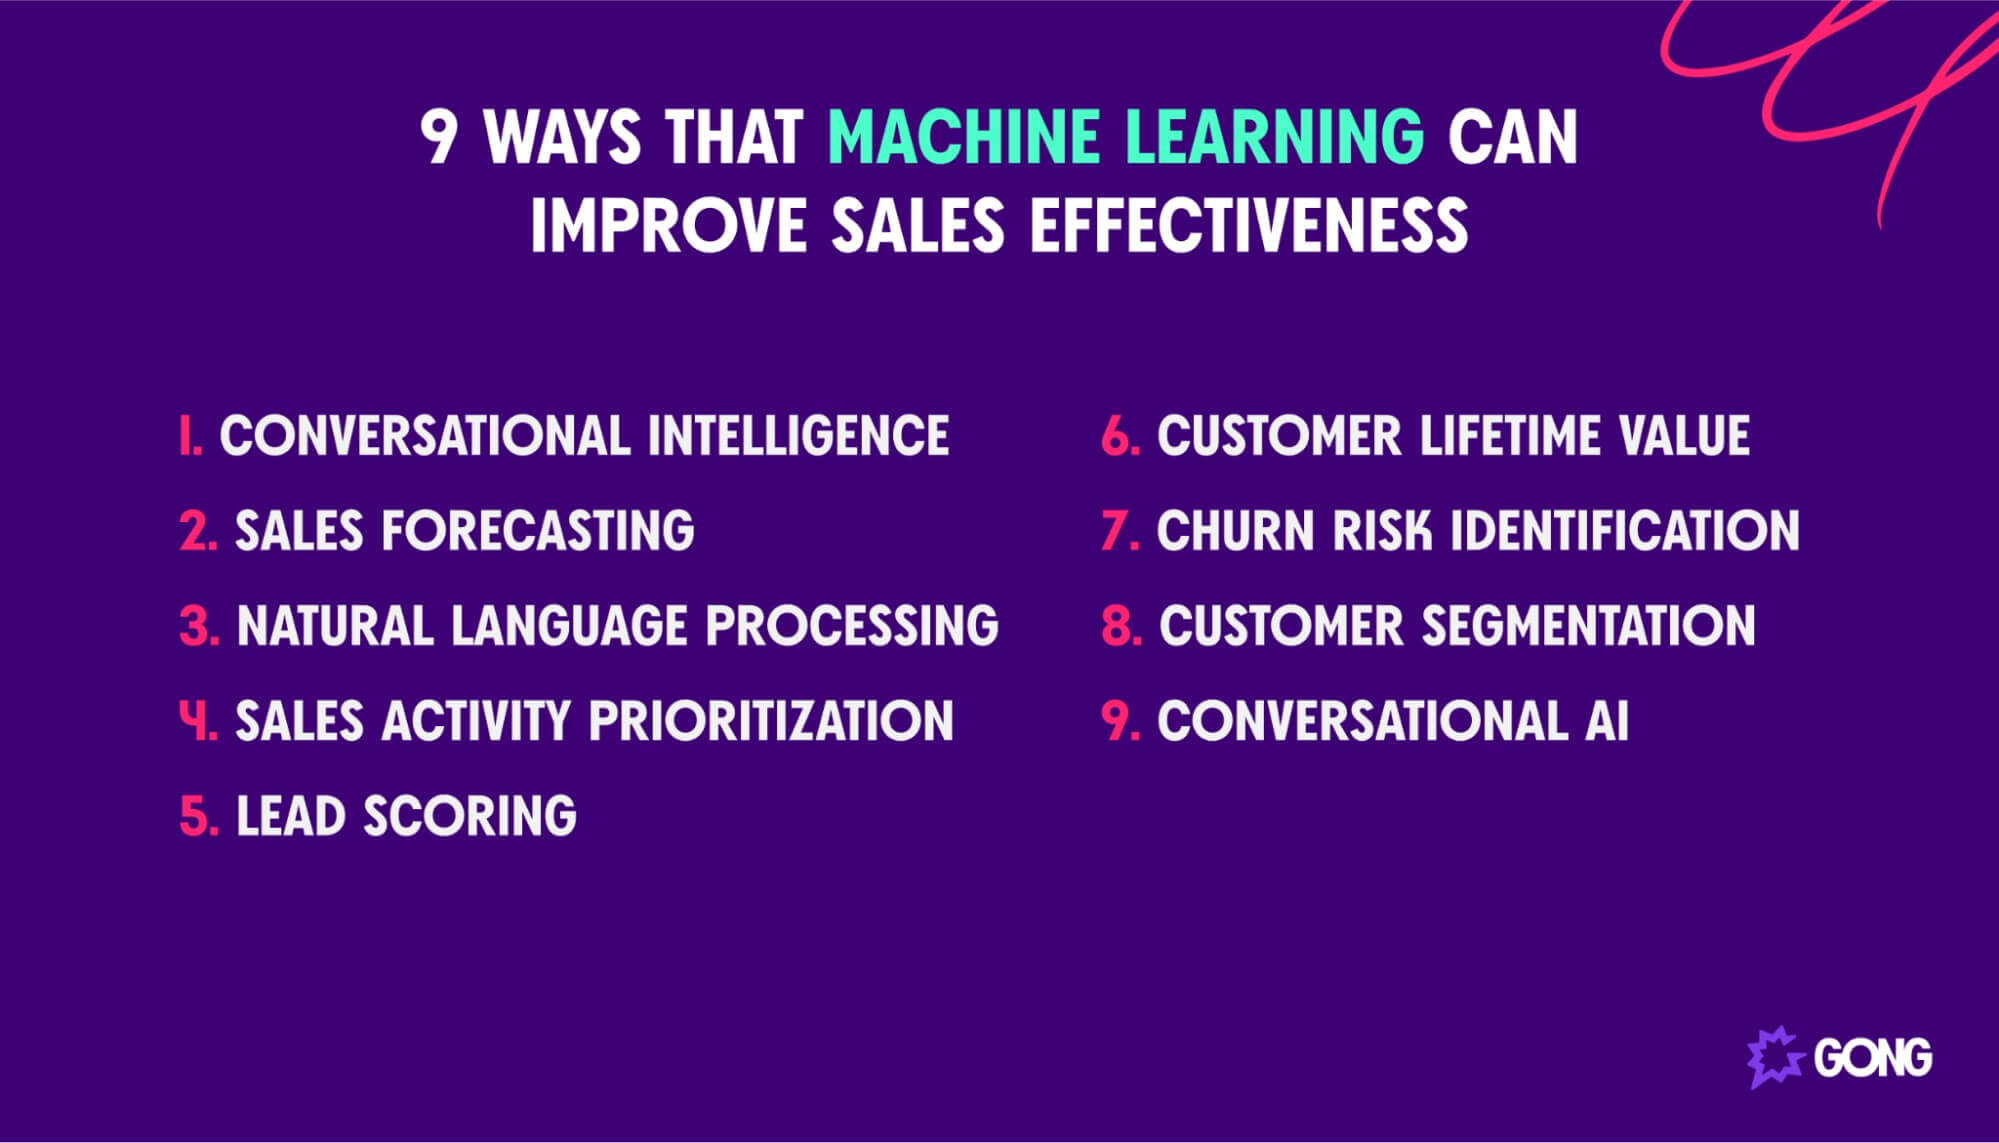 9 ways that machine learning can improve sales effectiveness